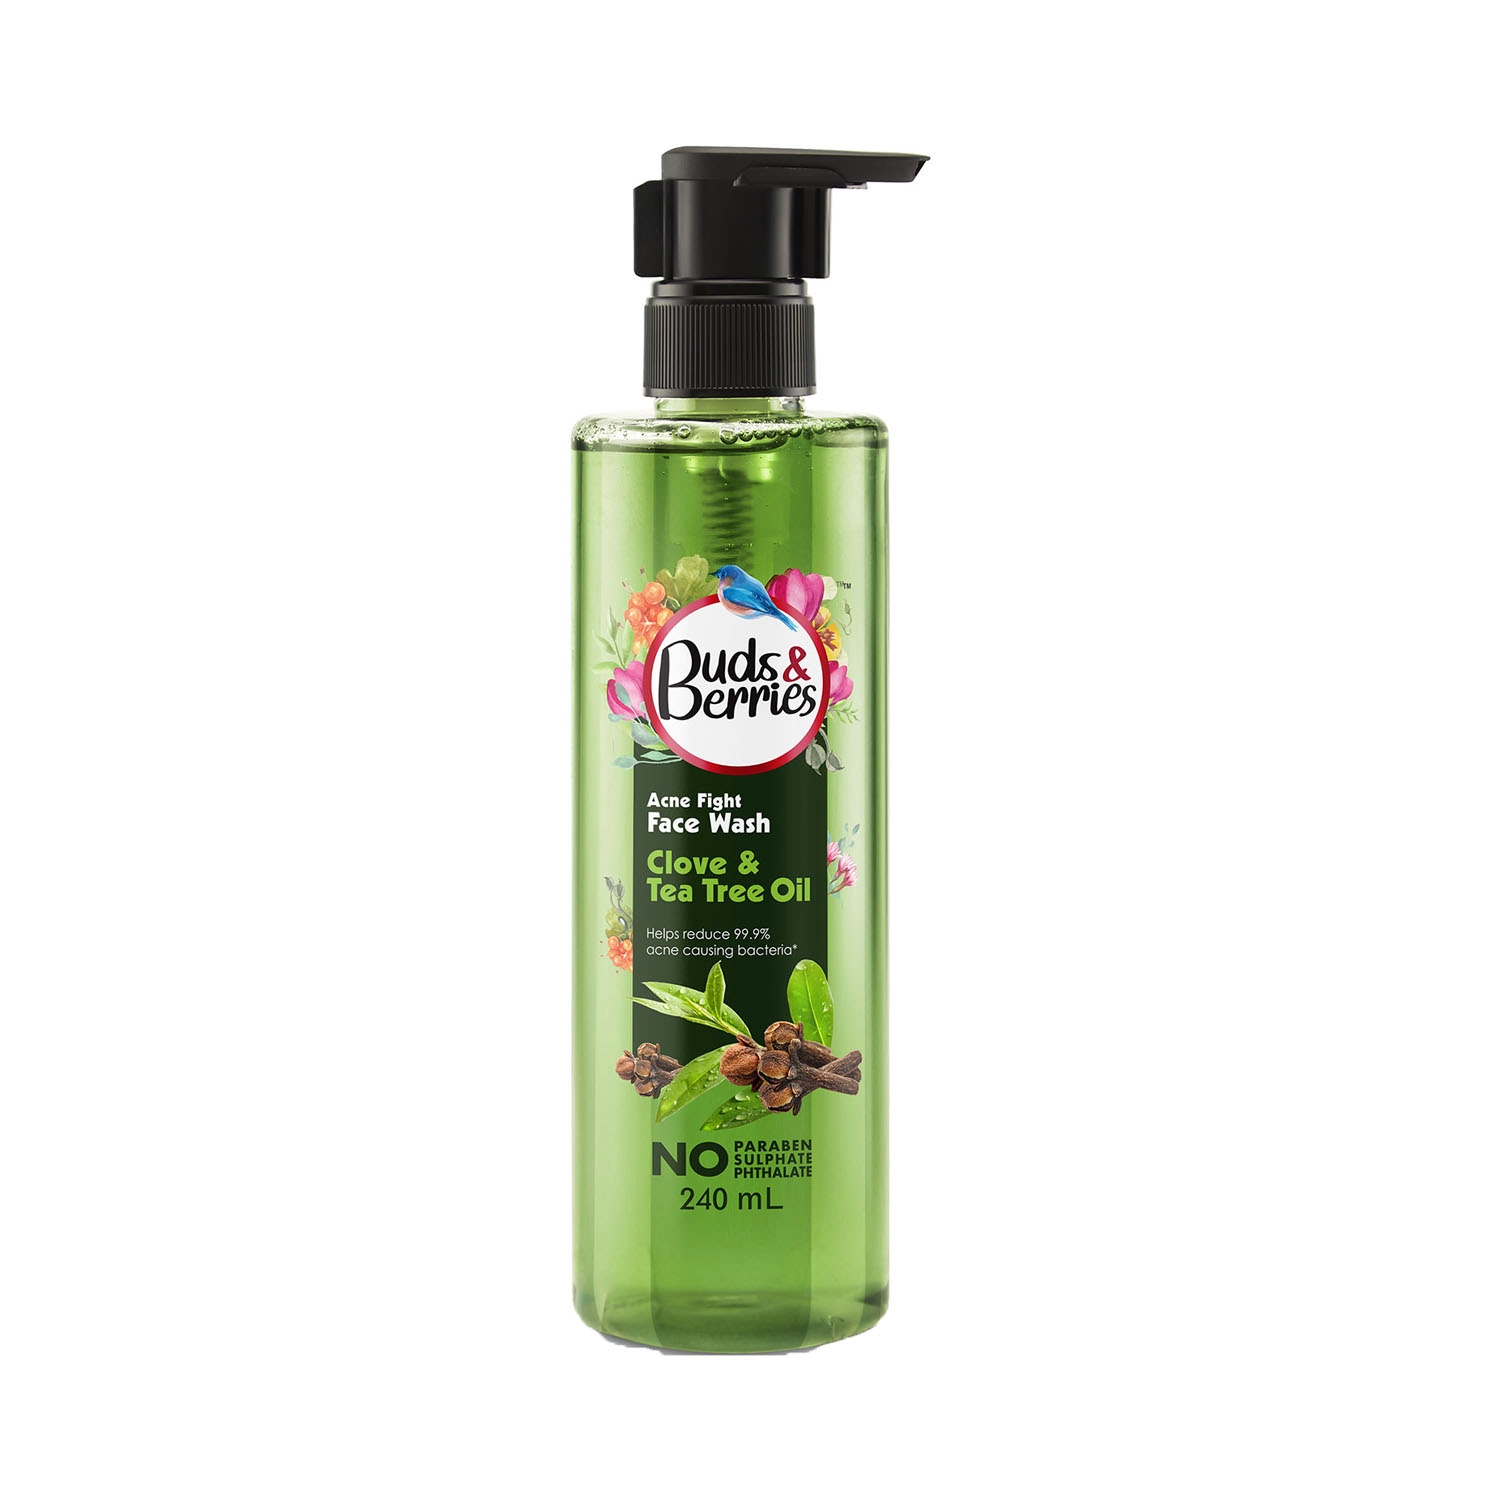 Buds & Berries | Buds & Berries Clove And Tea Tree Oil Face Wash (240ml)